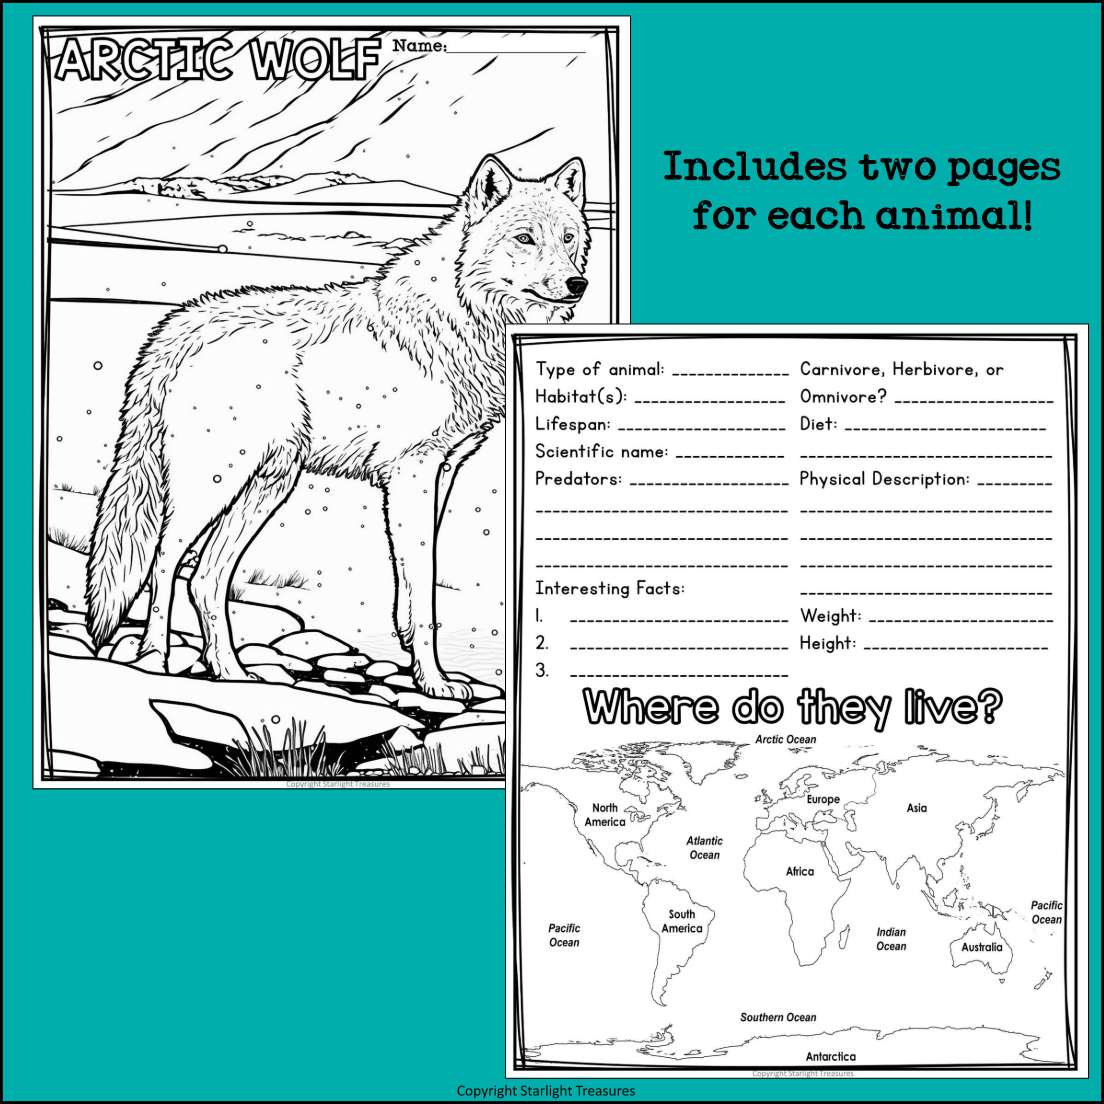 Lemming Animal Research Pages for learning about Arctic animals